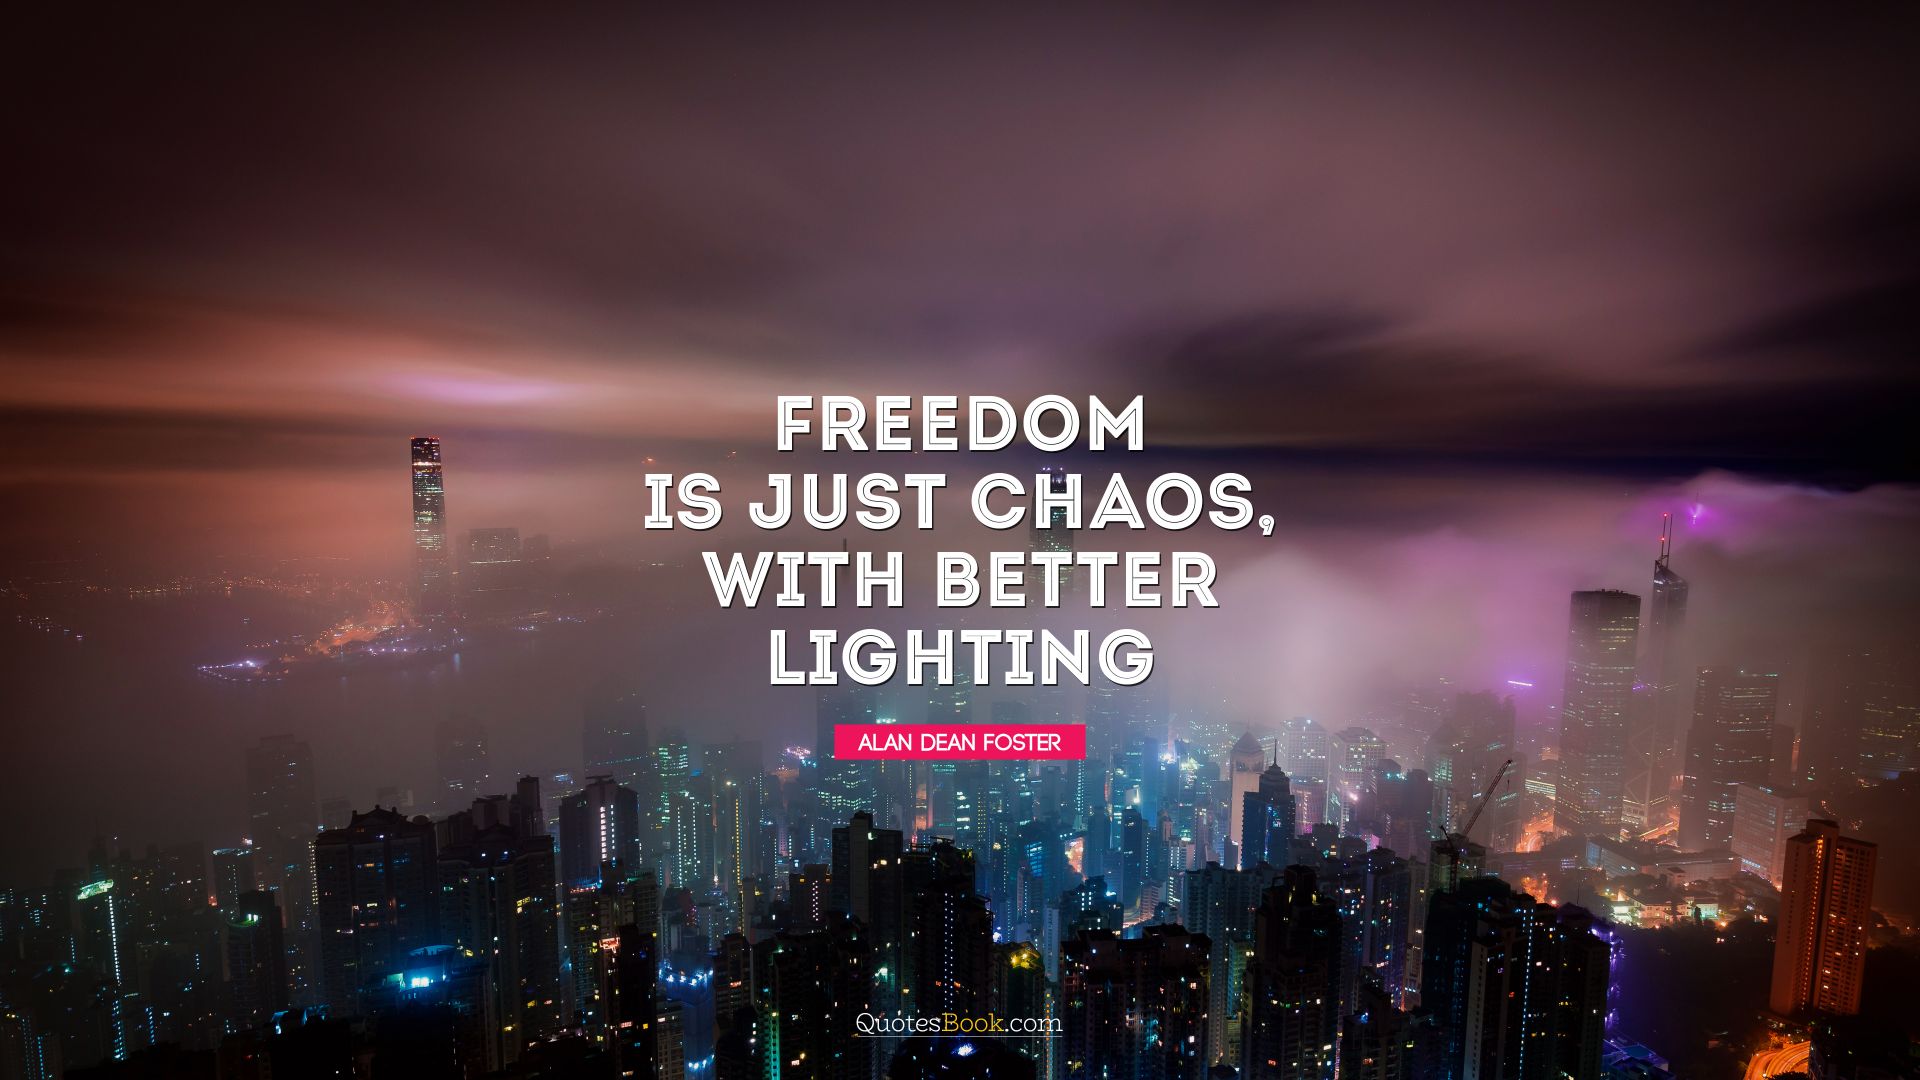 Freedom is just chaos with better lighting. - Quote by Alan Dean Foster